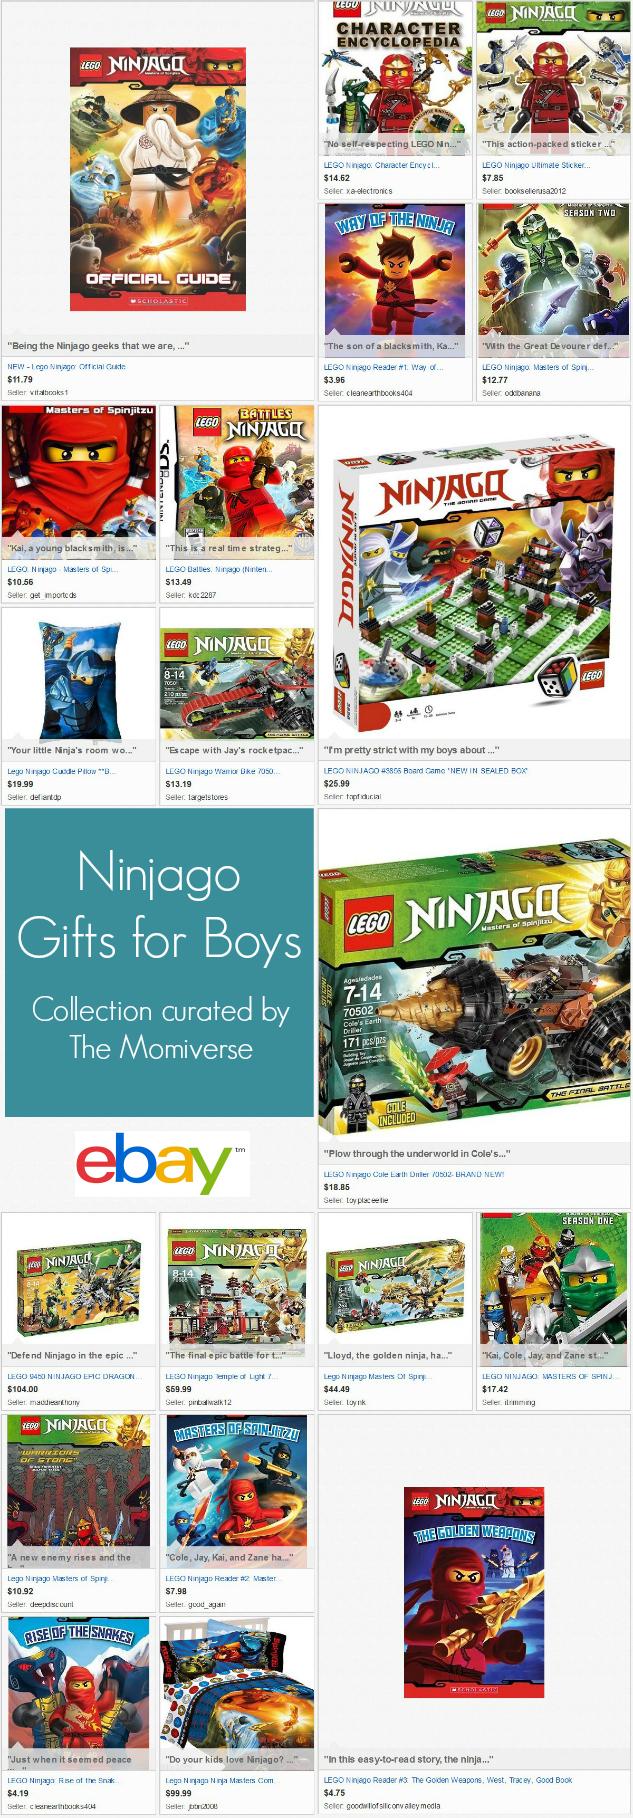 Ninjago Gifts for Boys | eBay Collection curated by The Momiverse | Gift Guide